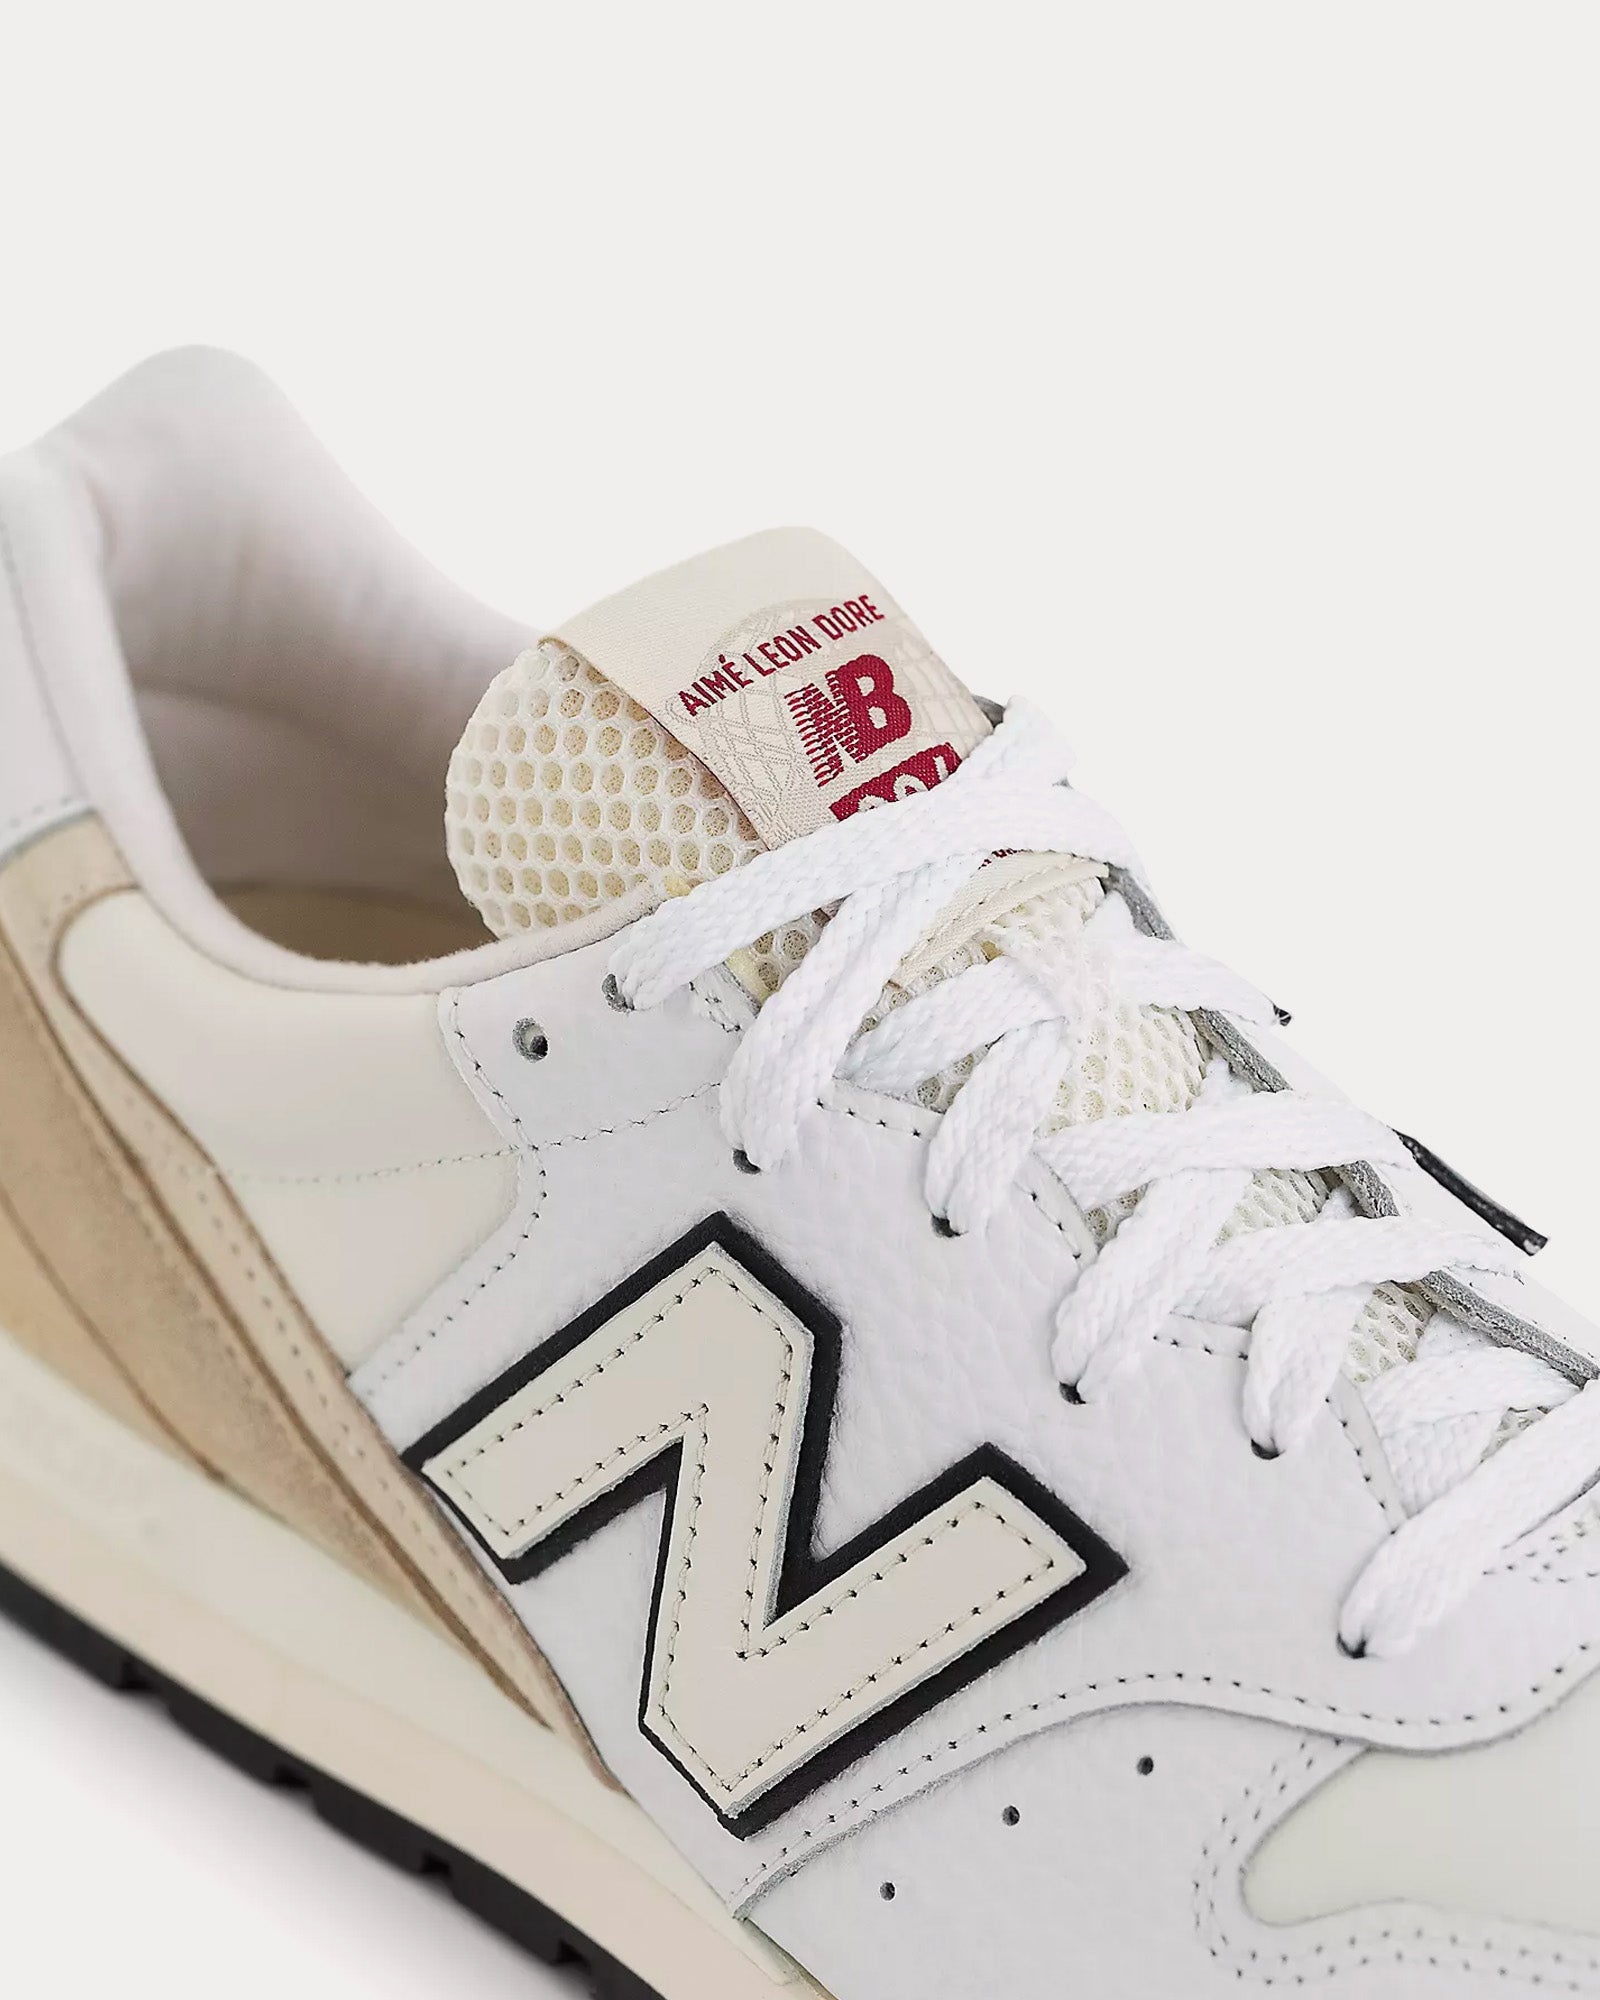 New Balance x Aime Leon Dore - Made in USA 996 White / Sandstone Low Top Sneakers